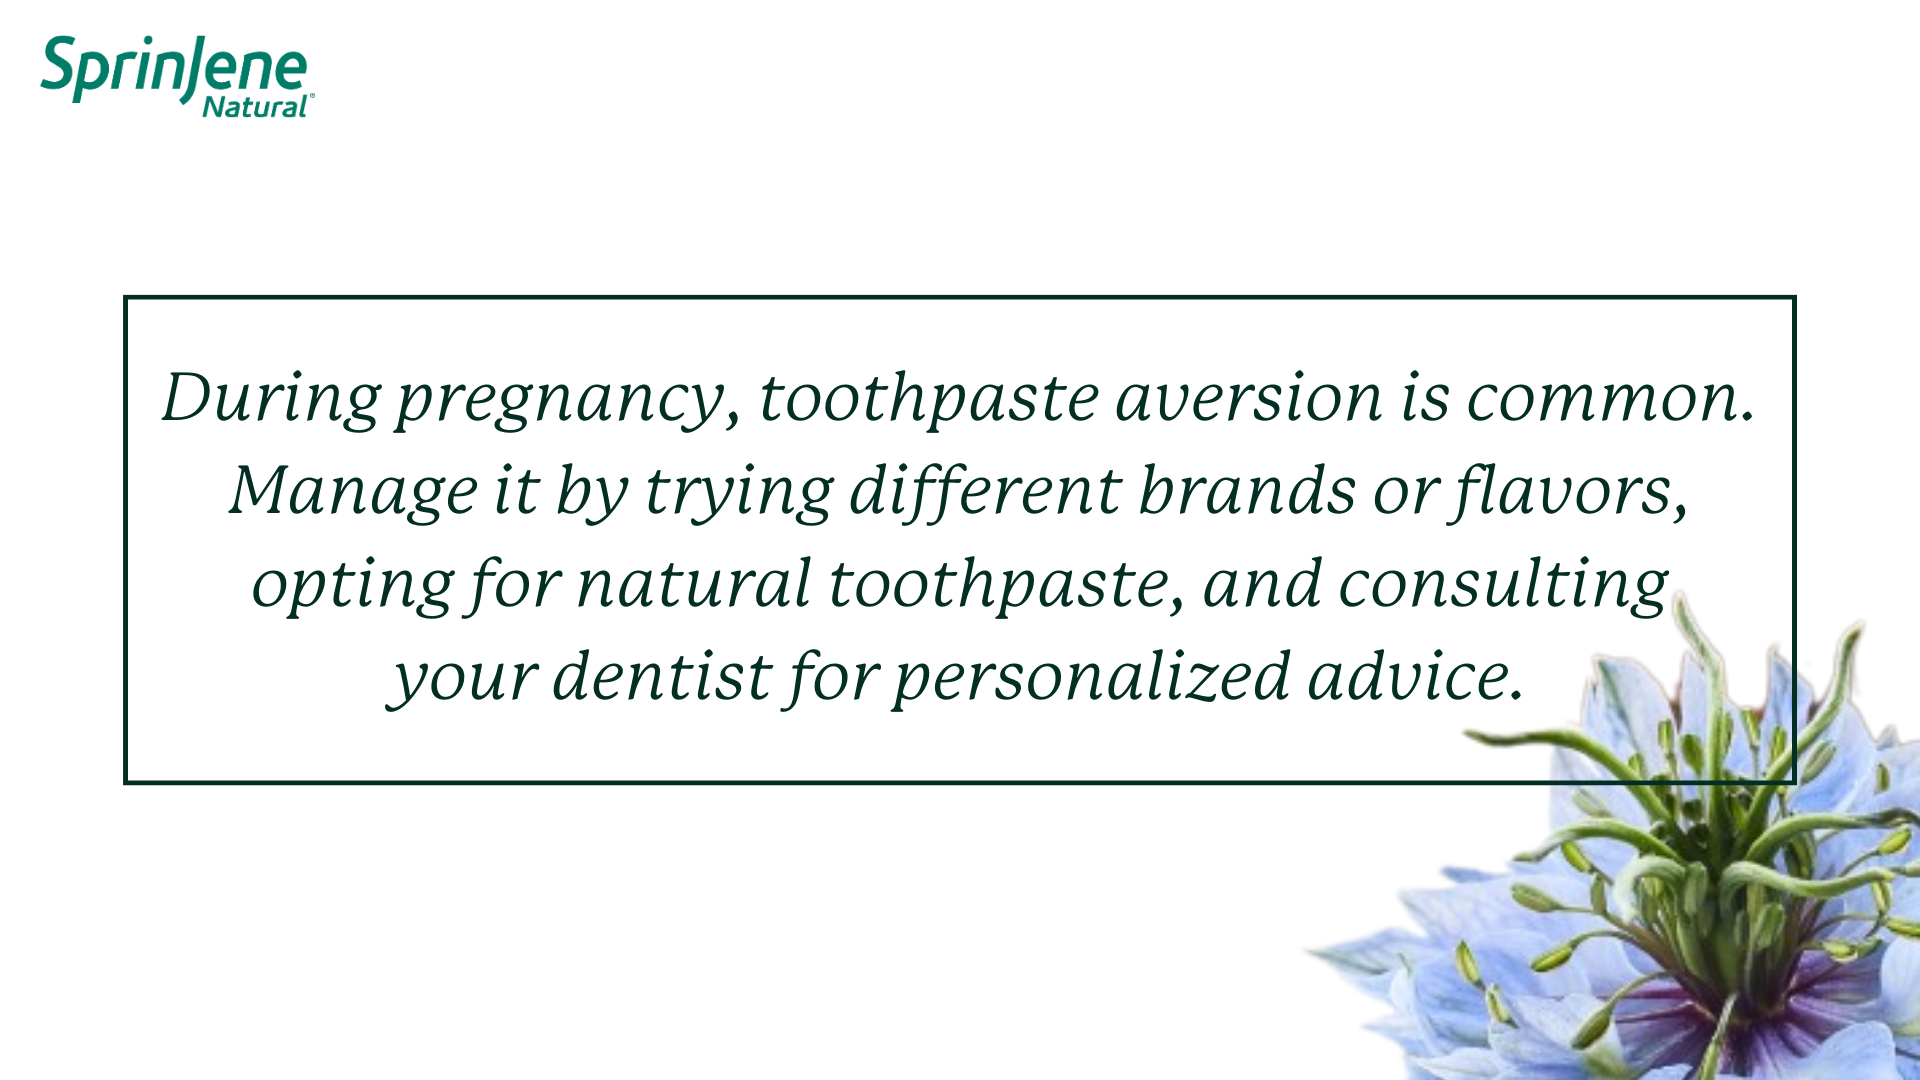 During pregnancy, toothpaste aversion is common. Manage it by trying different brands or flavors, opting for natural toothpaste, and consulting your dentist for personalized advice.